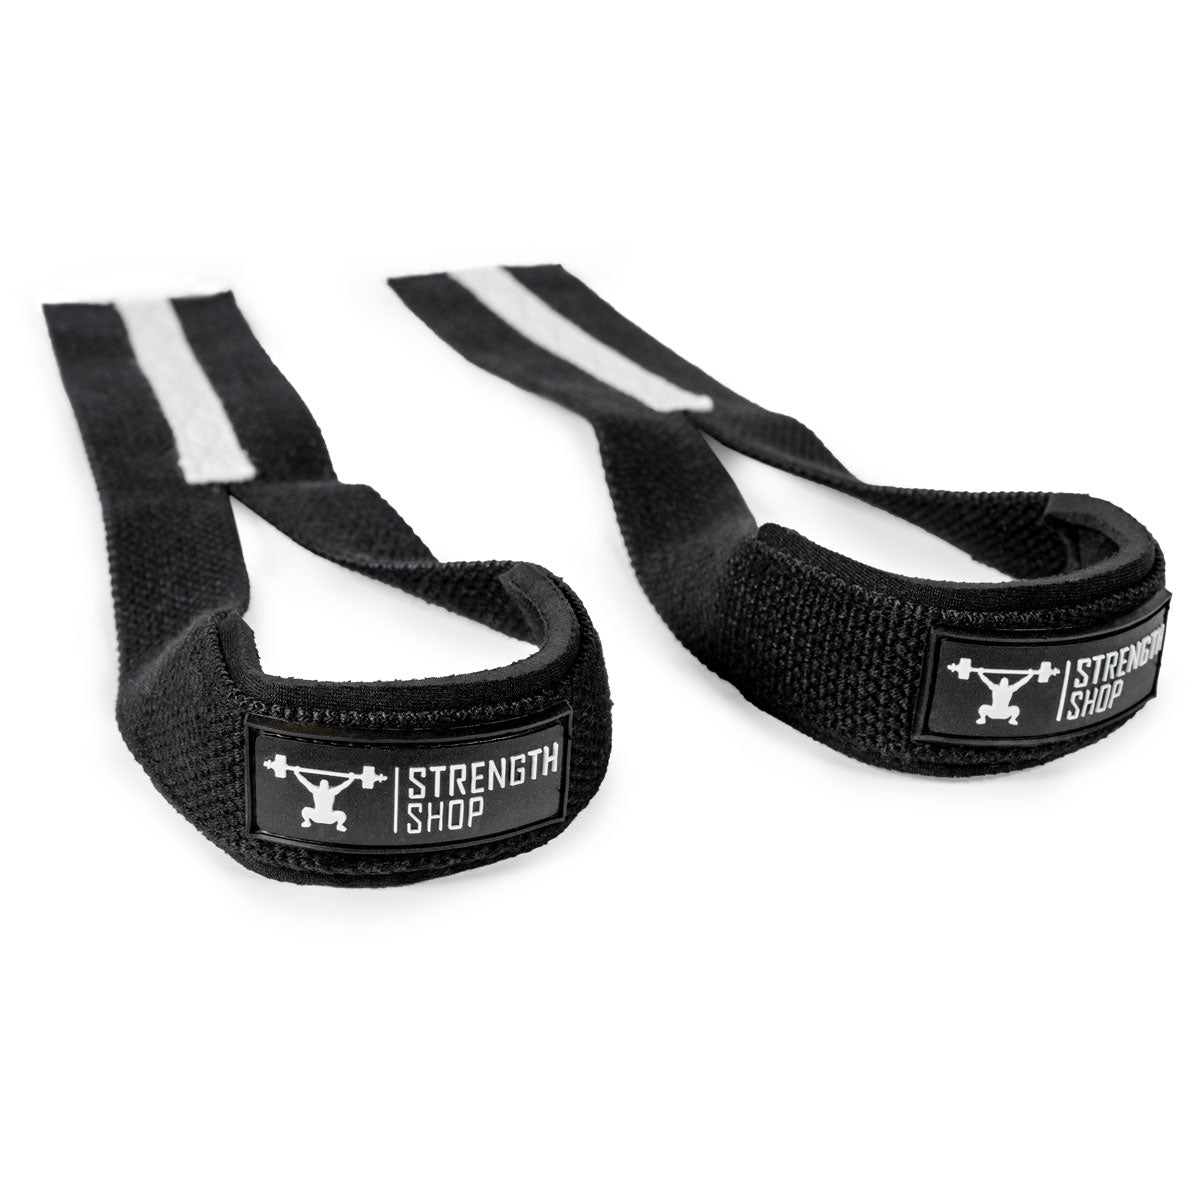 Stealth-wrapped Training Strap Snatch Me Up Bandage Ladies Slim